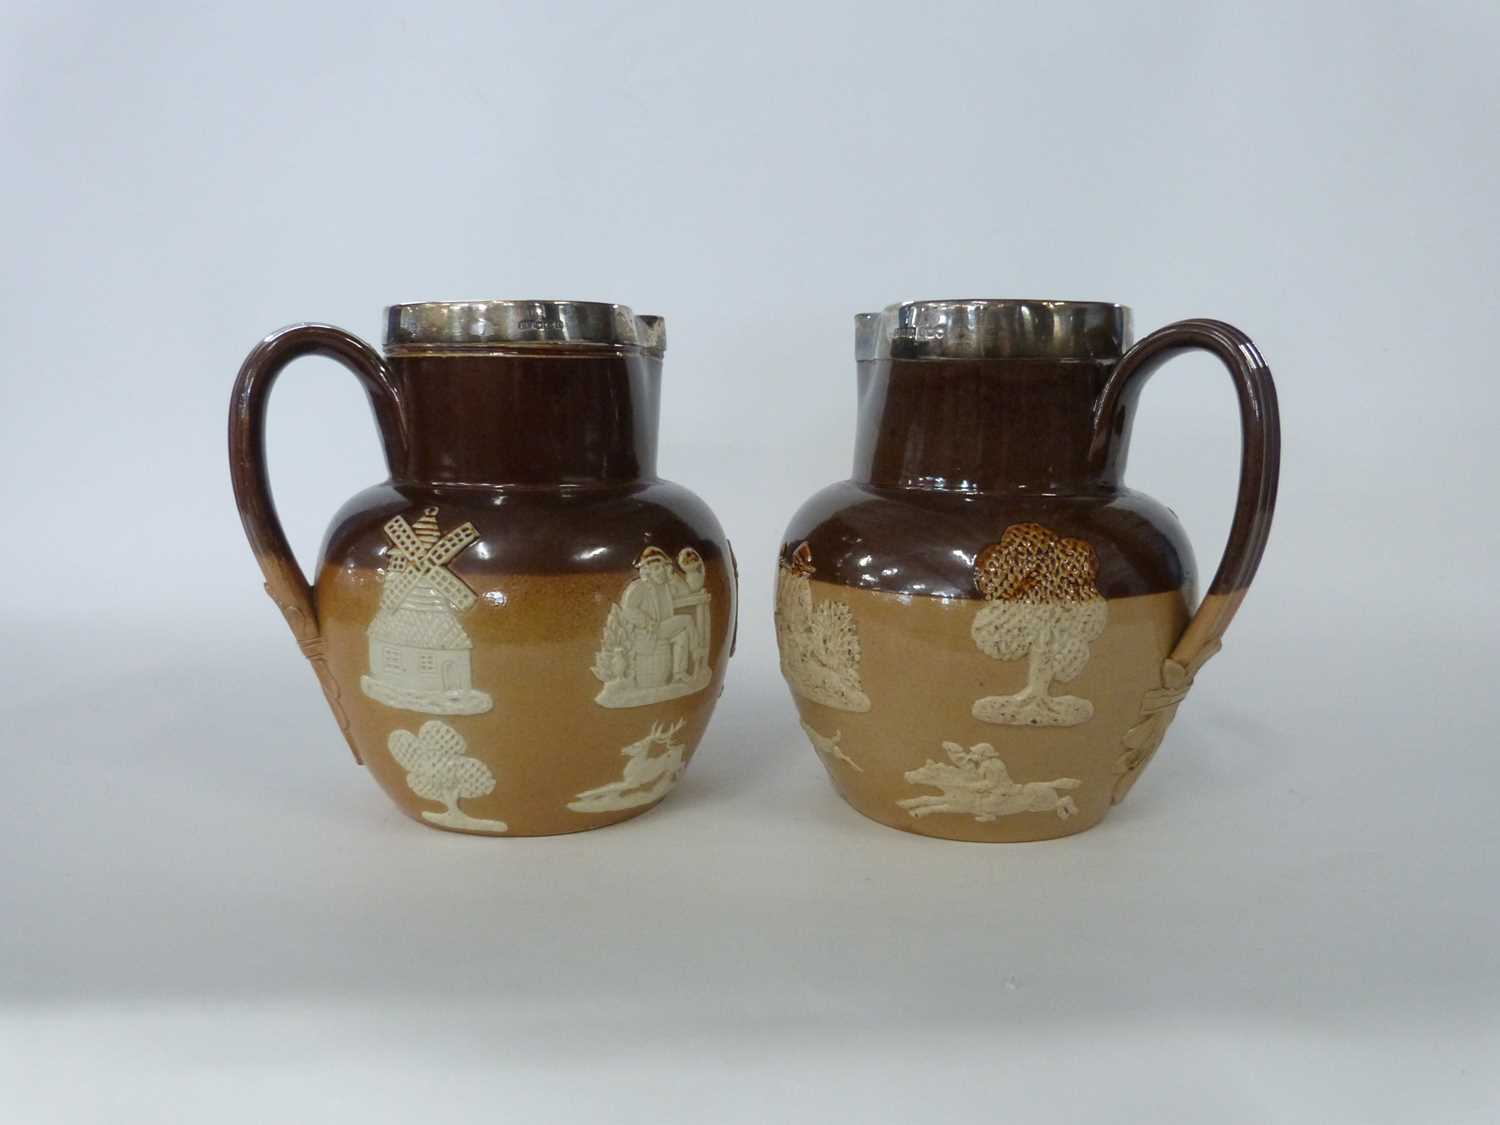 Two Doulton Lambeth harvest jugs with Sheffield silver rims